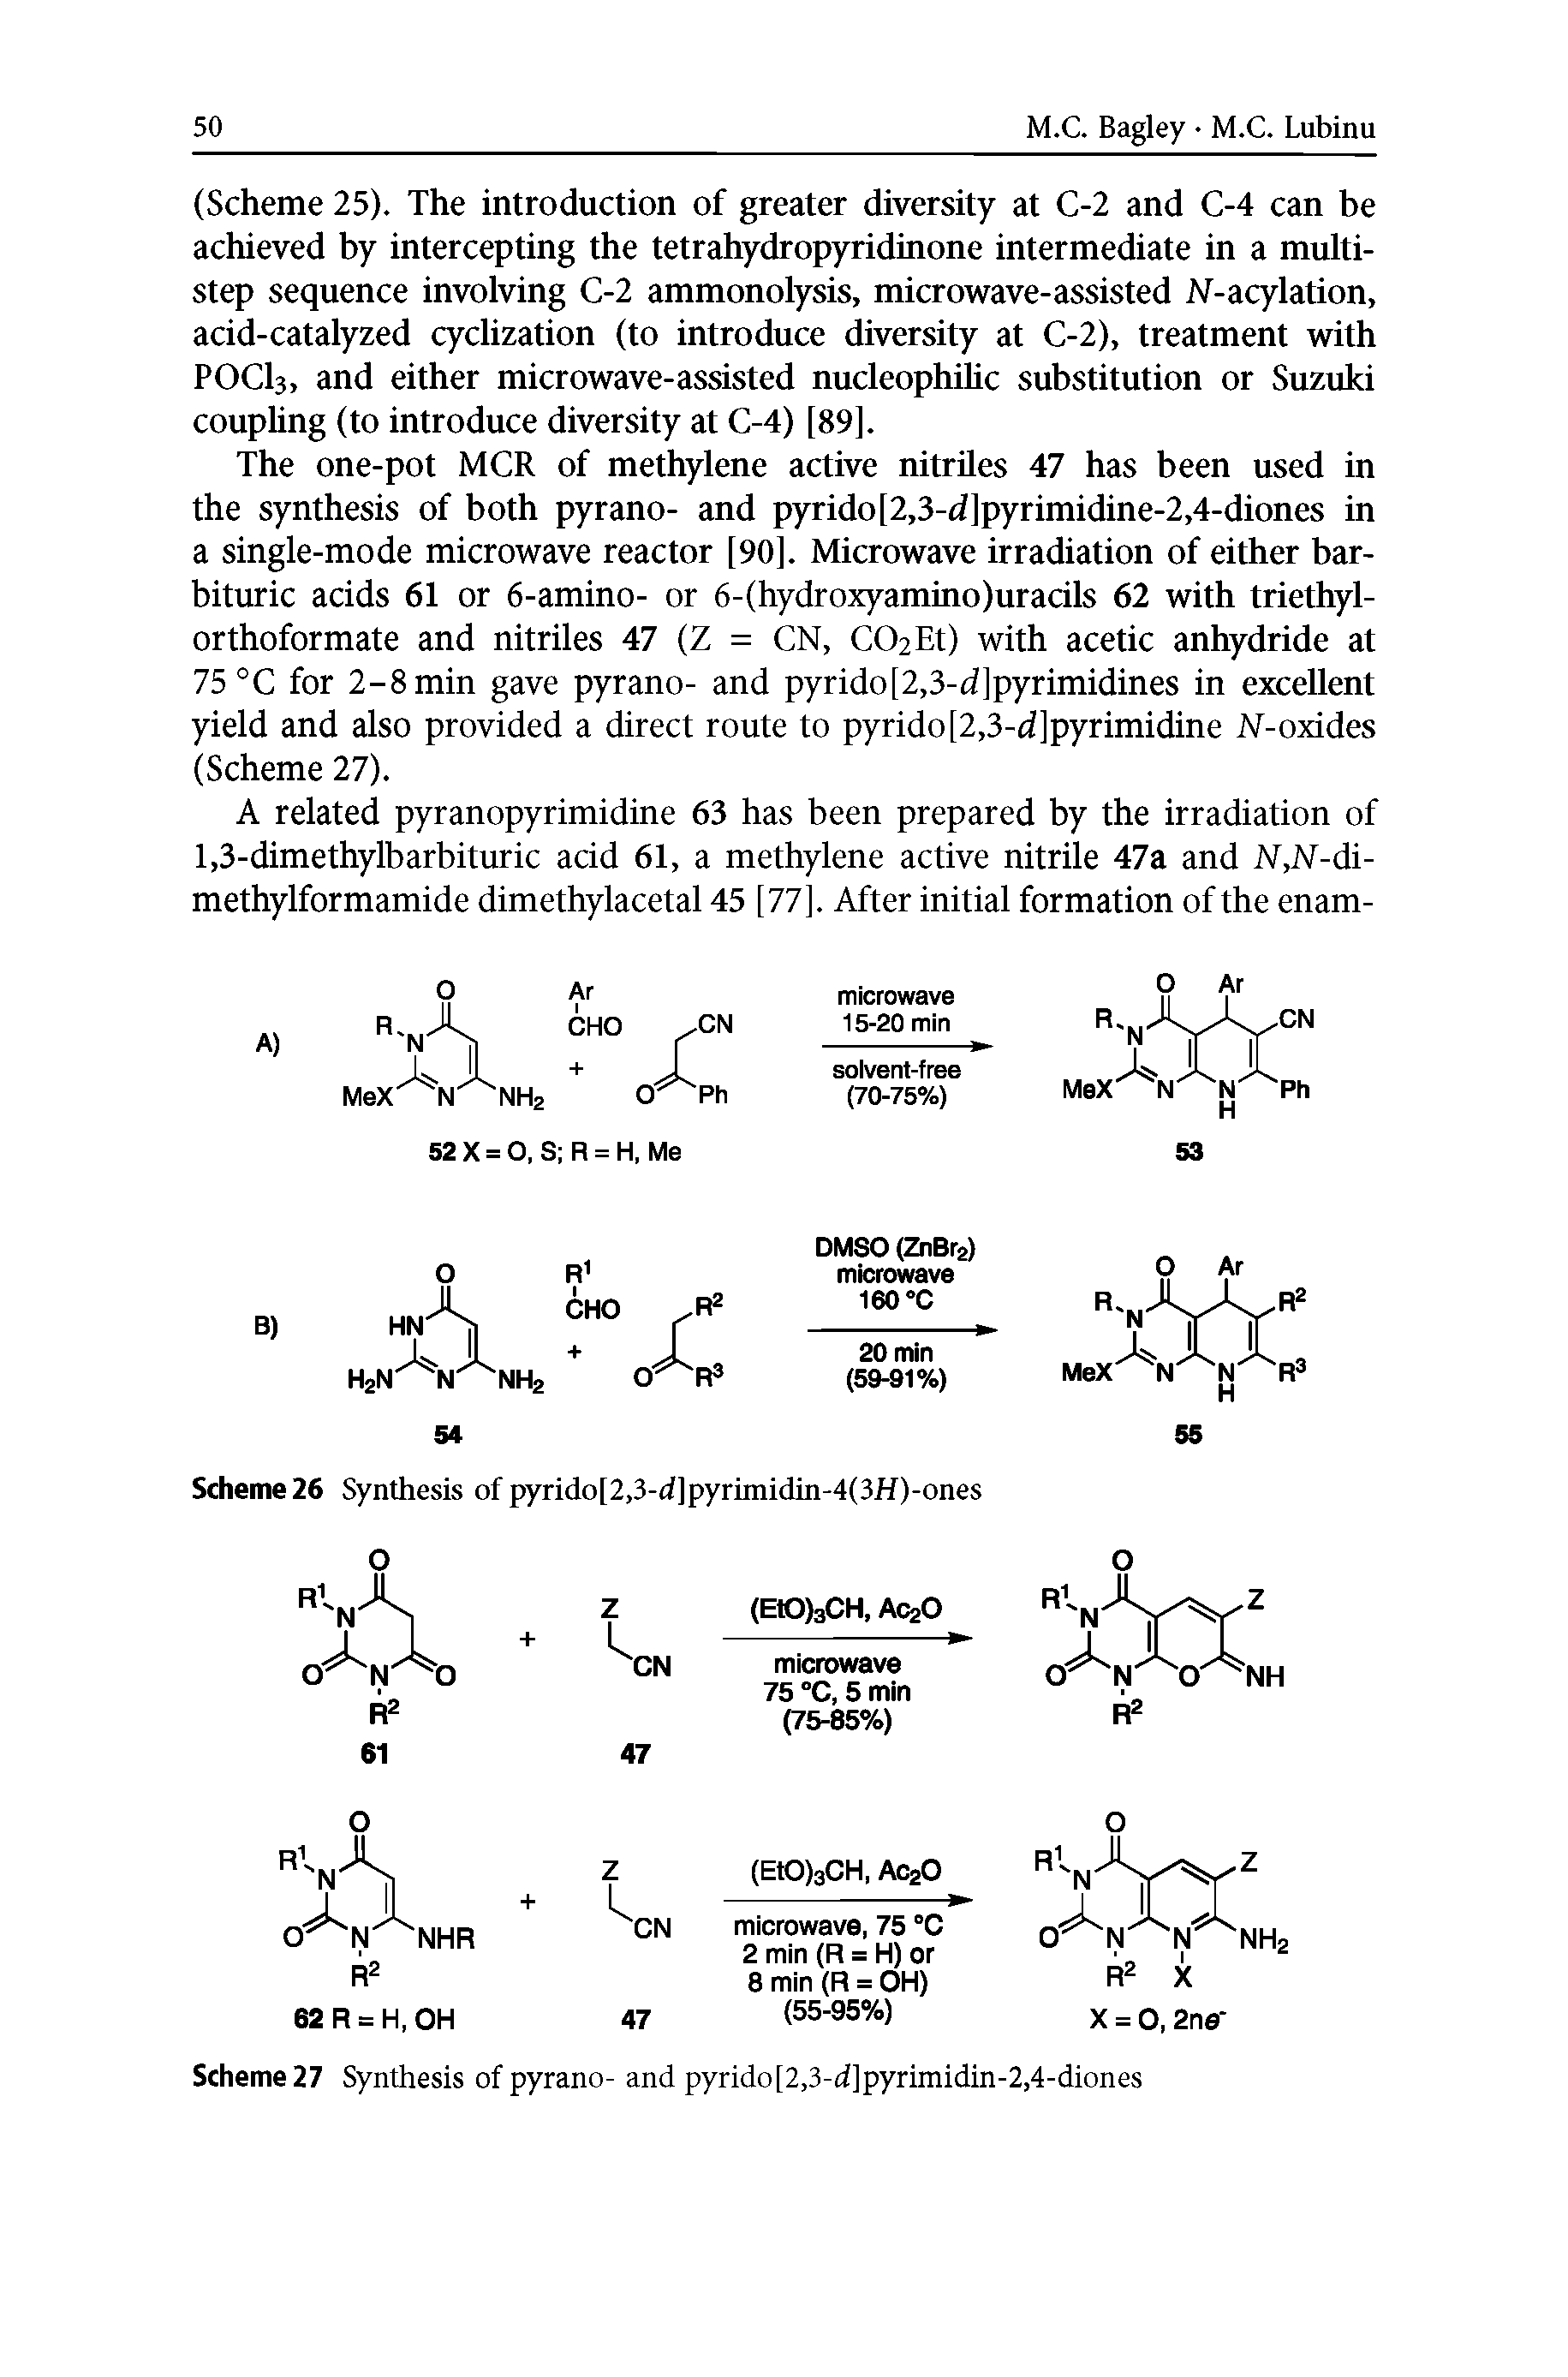 Scheme27 Synthesis of pyrano- and pyrido[2,3-d]pyrimidin-2,4-diones...